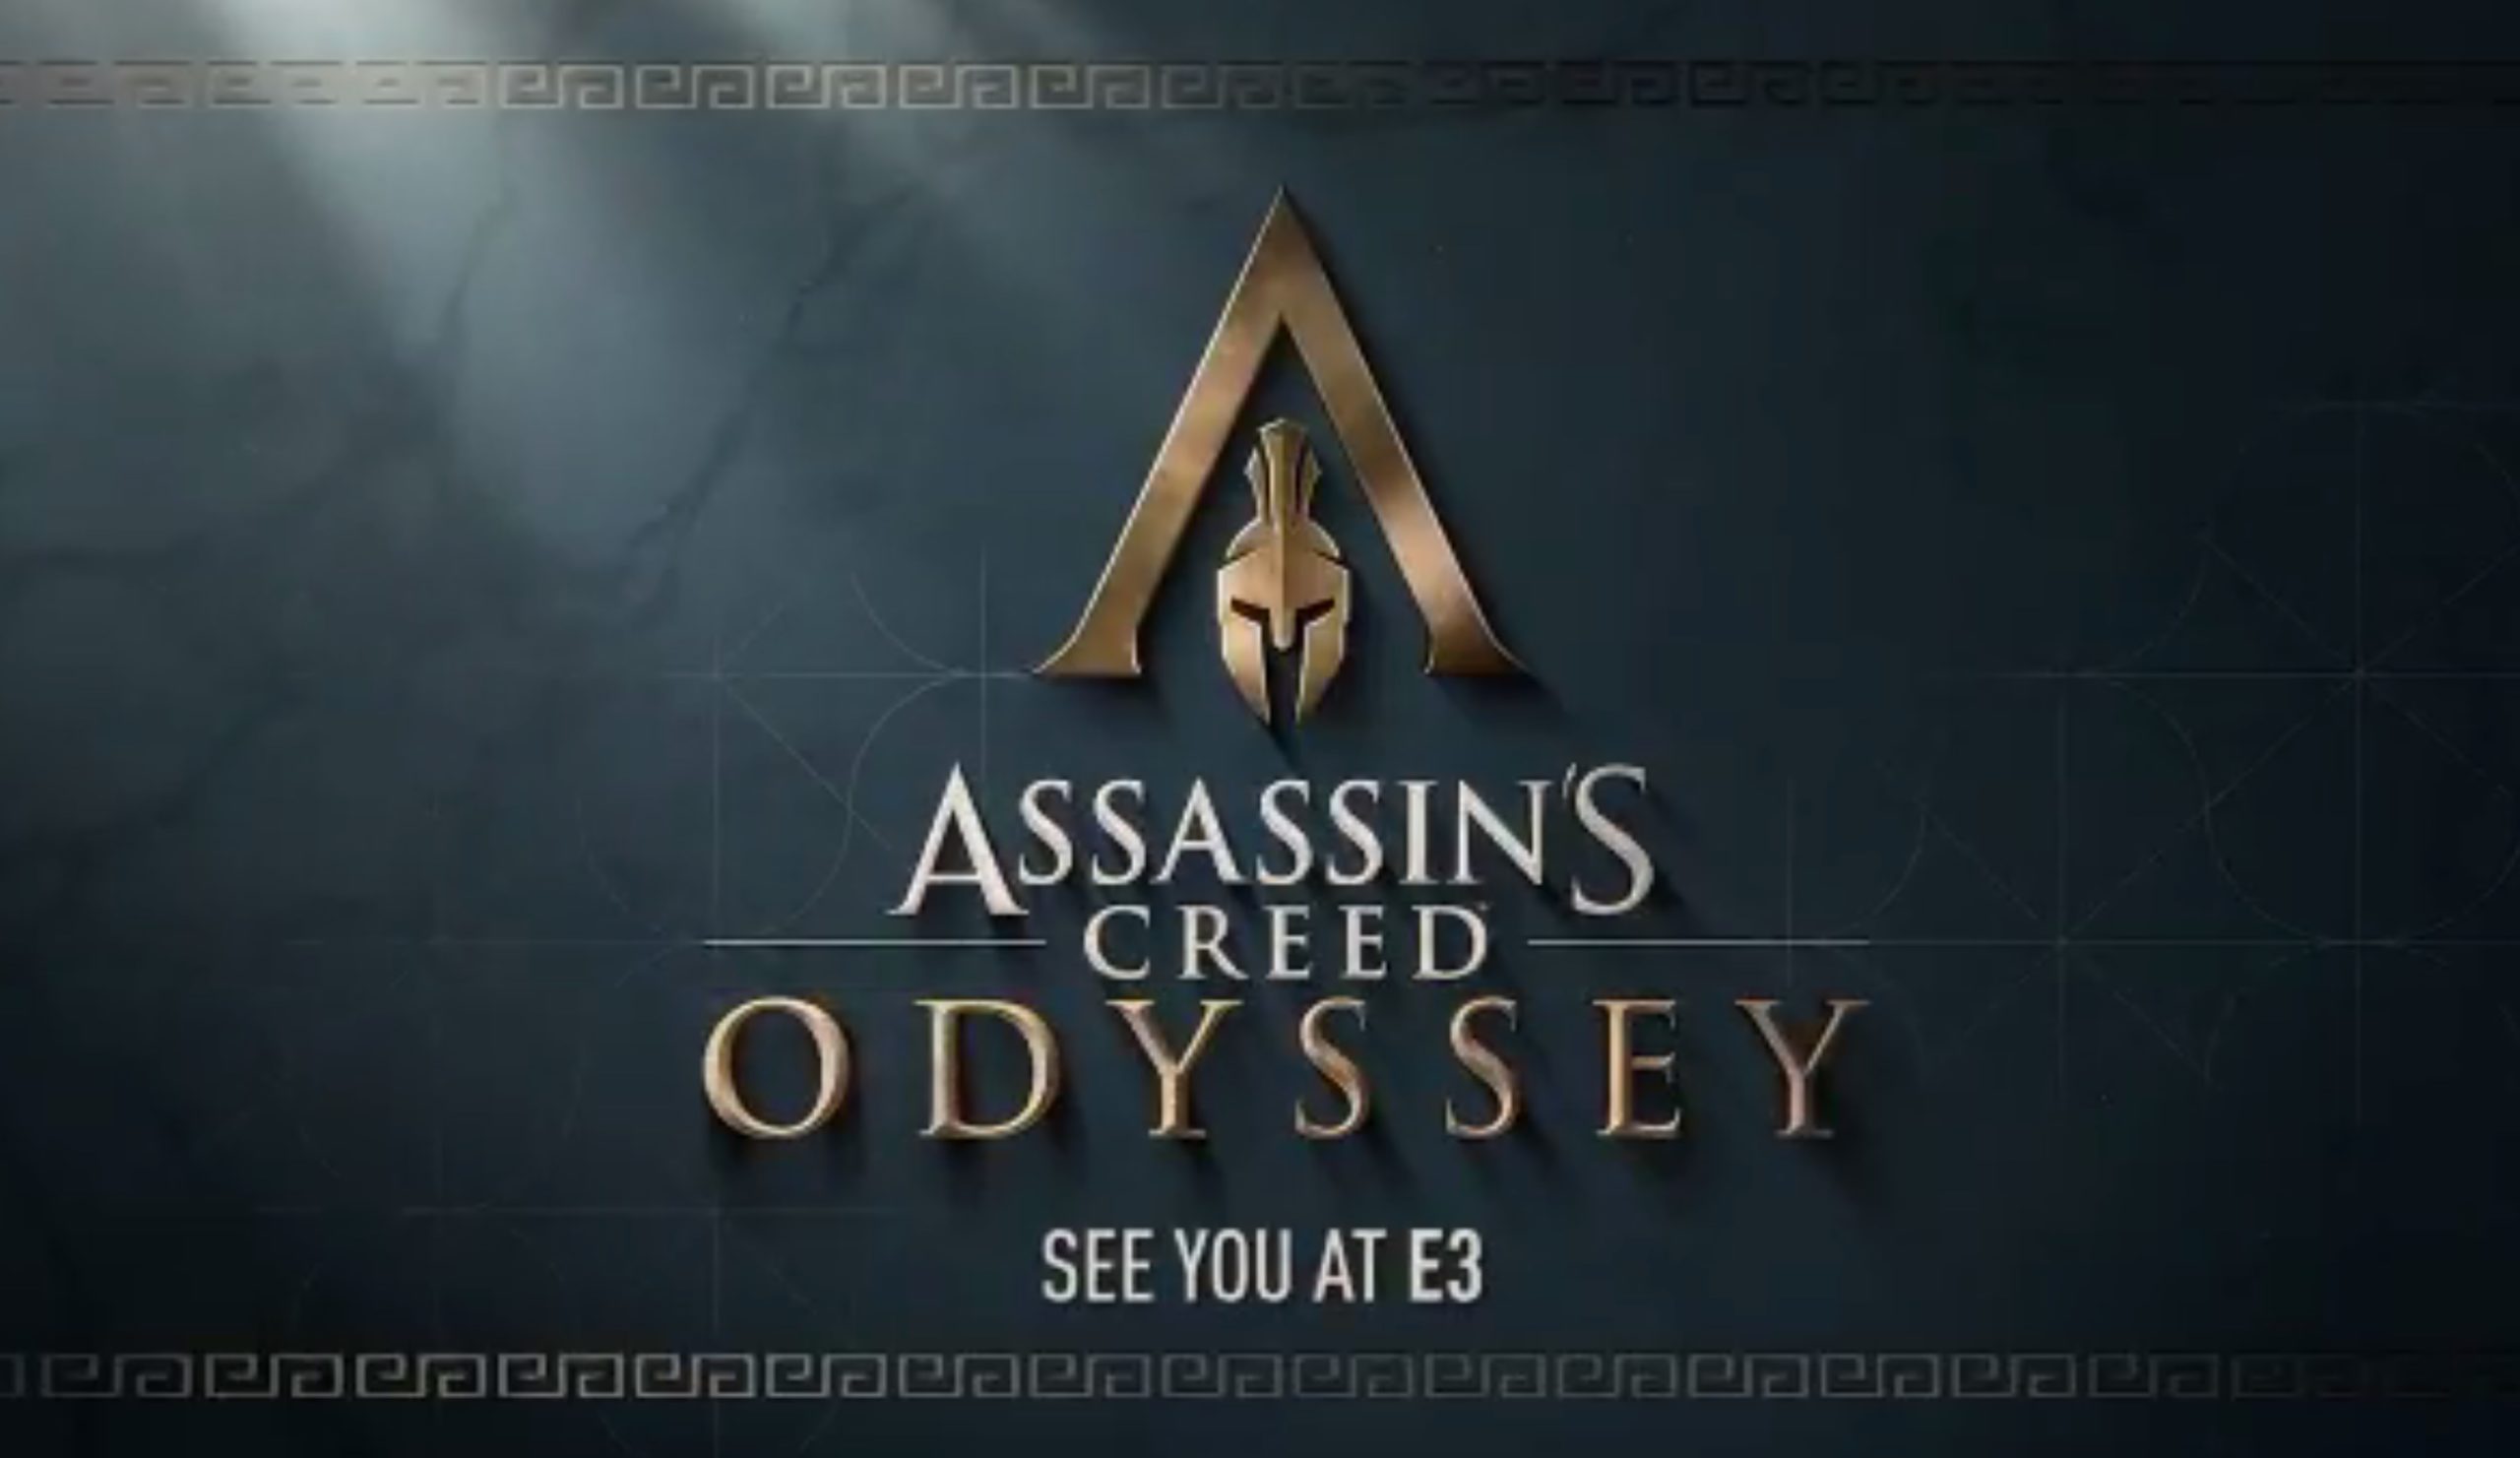 ‘Assassin’s Creed Odyssey’ Confirmed By Ubisoft